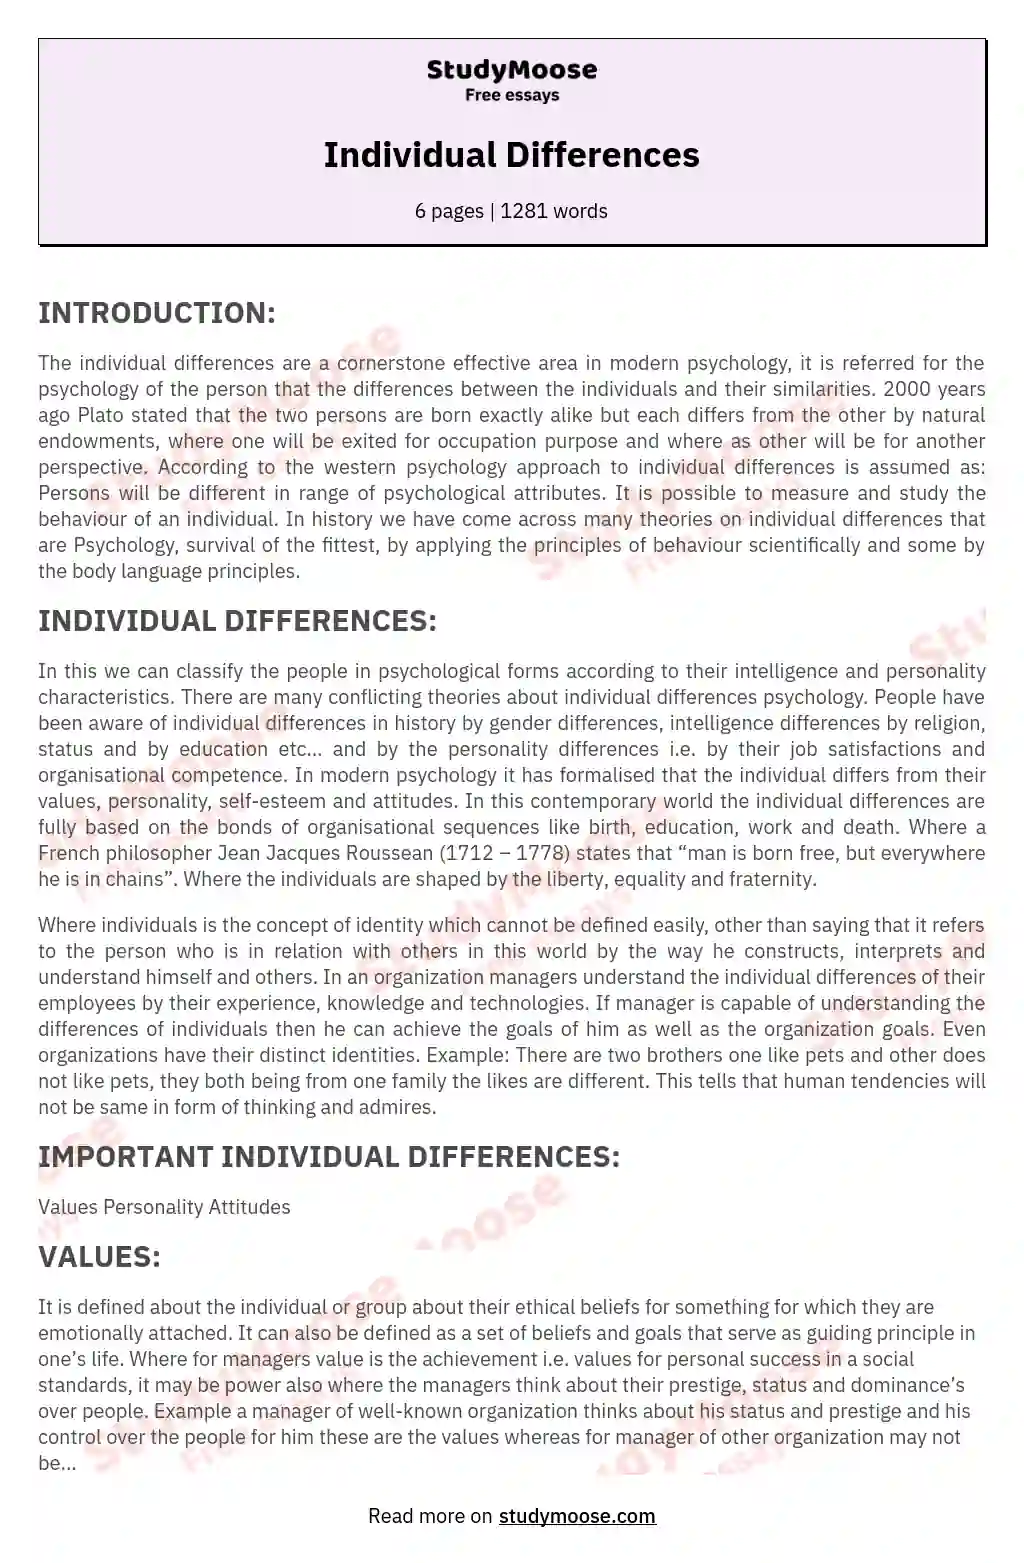 Individual Differences essay